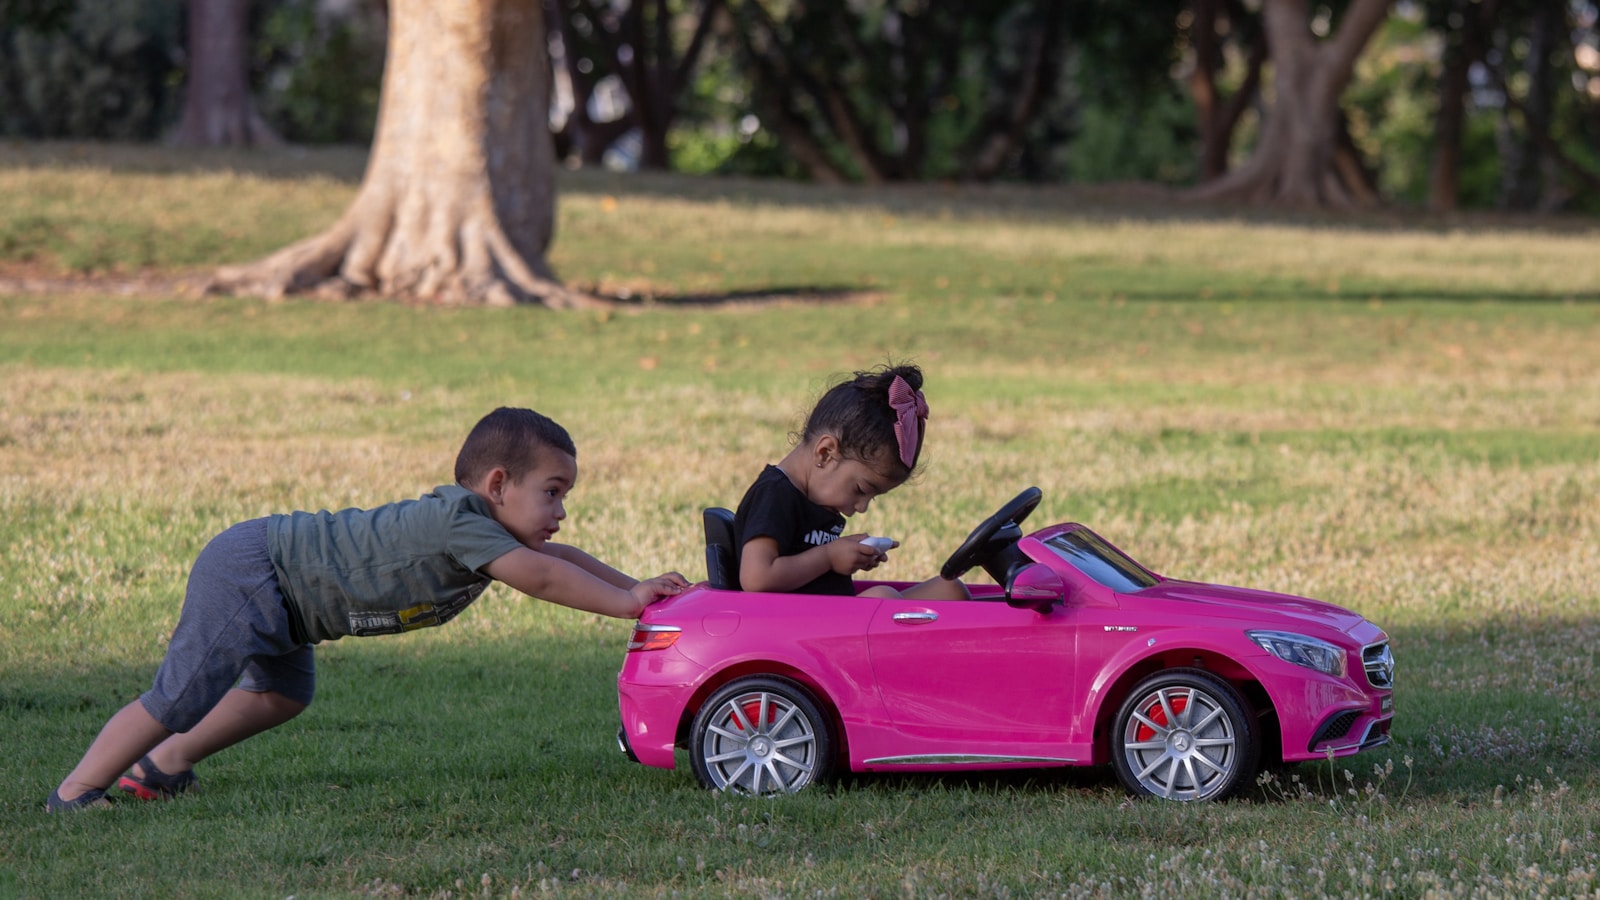 two children playing with a pink toy car